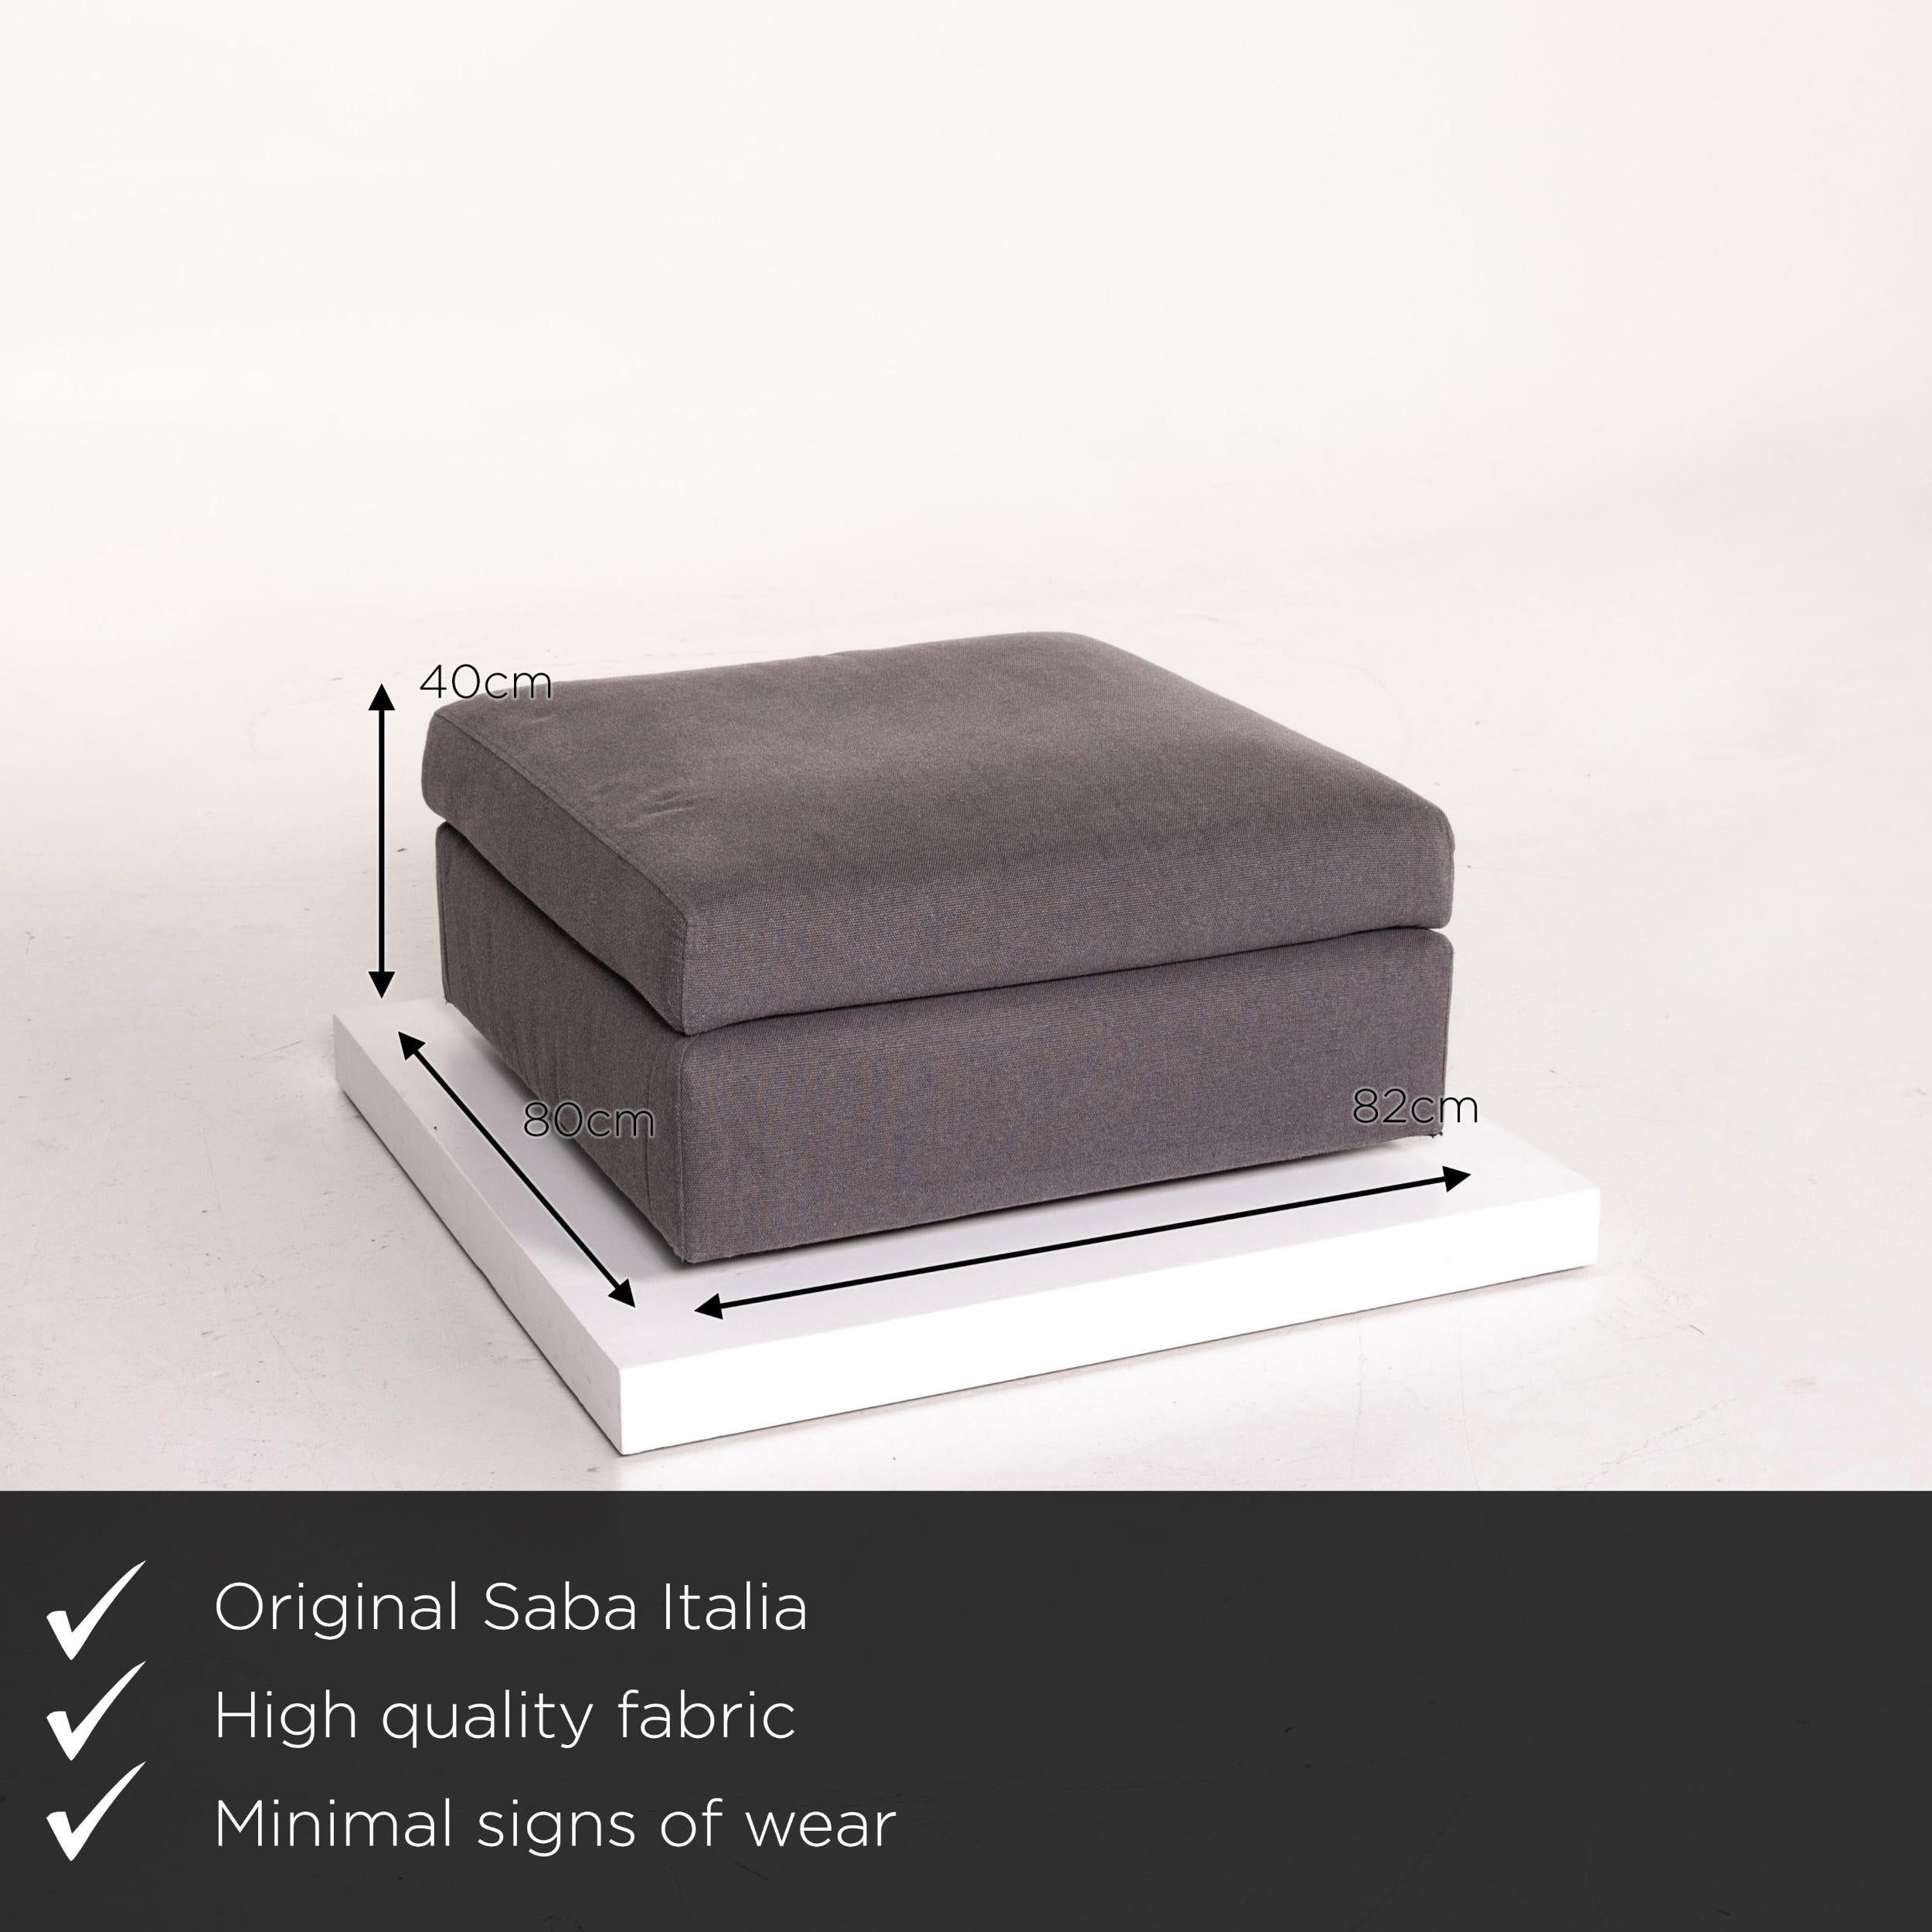 We present to you a Saba Italia fabric ottoman gray ottoman.

Product measurements in centimeters:

Depth 80
Width 82
Height 40.







 